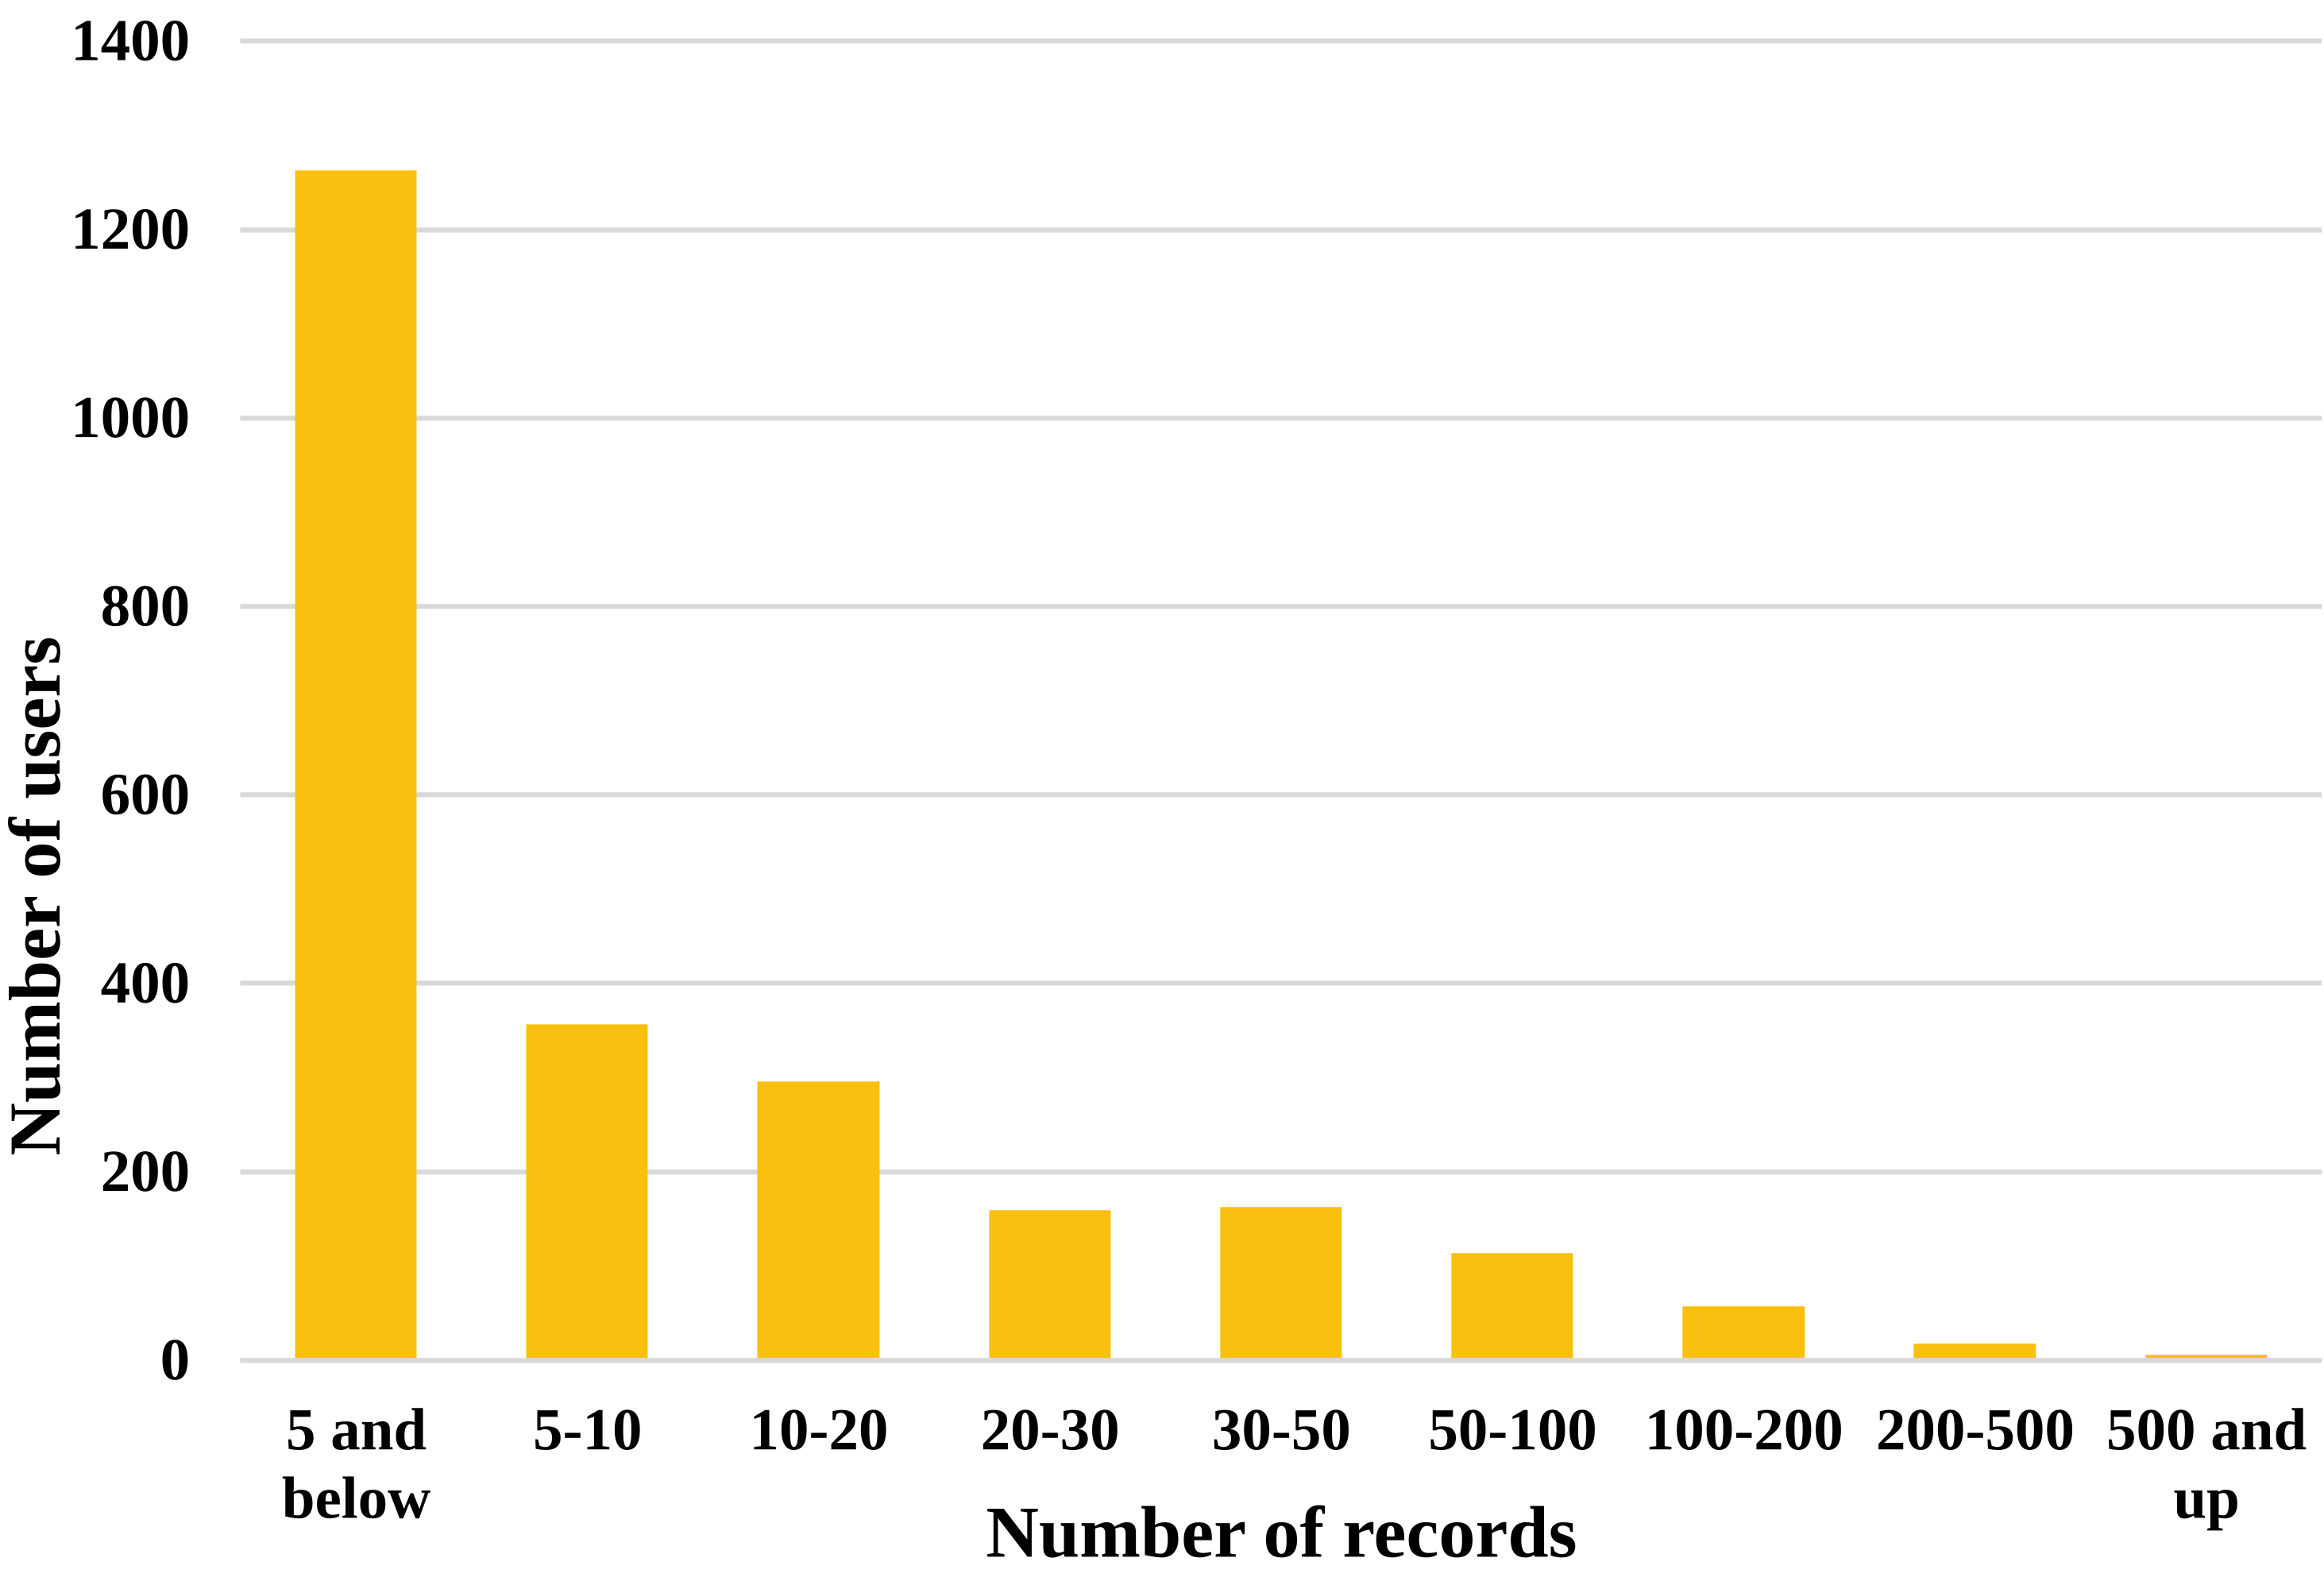 Distribution of the number of records by different users (raw data). Horizontal axis: Number of records, vertical axis: Number of users.